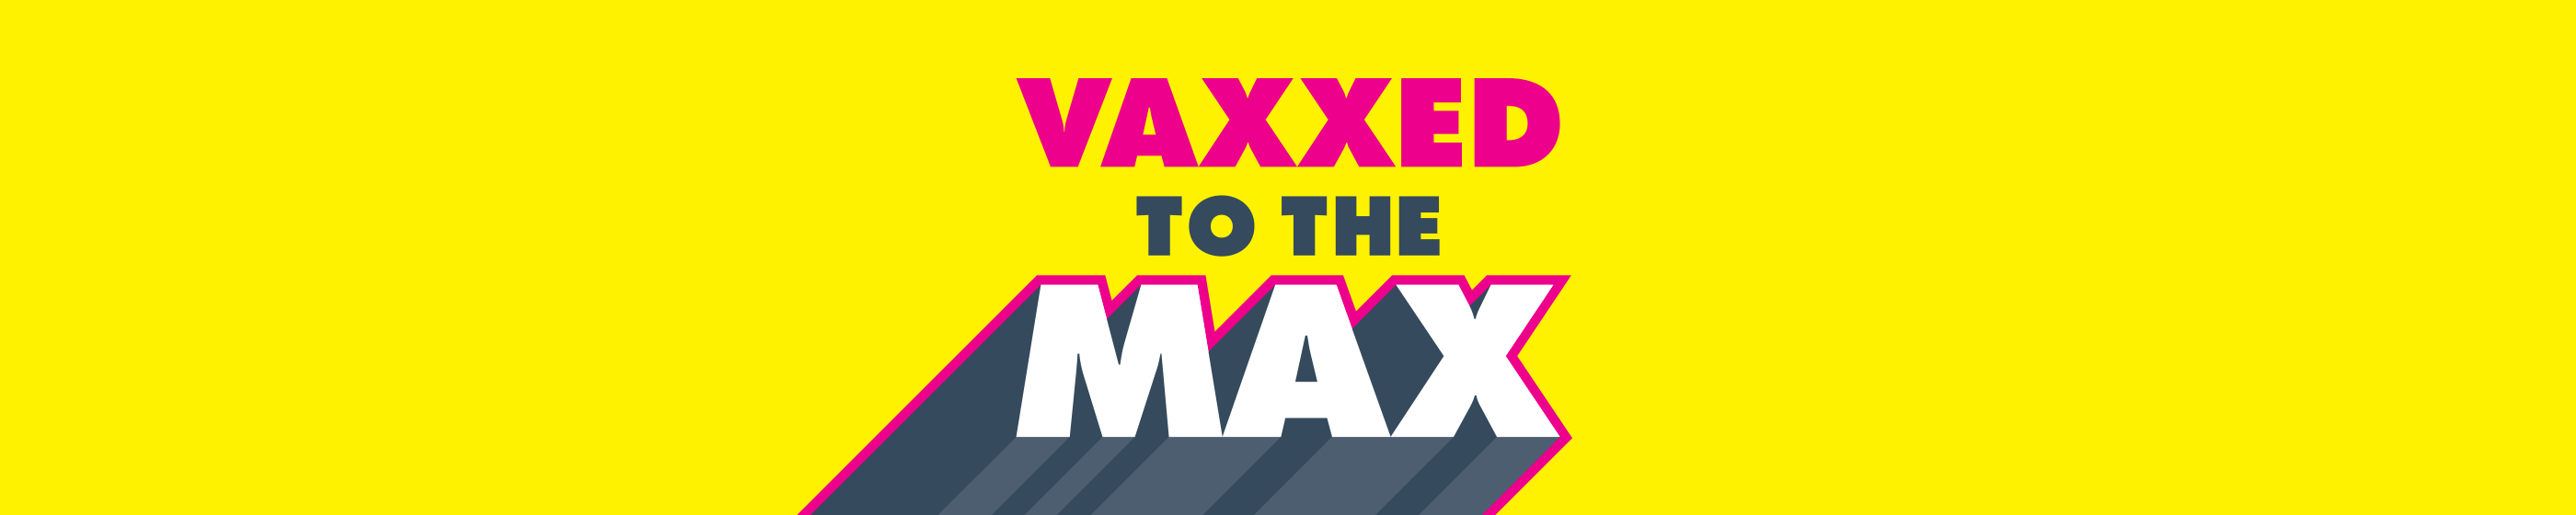 Vaxxed To The Max Button Cover Image